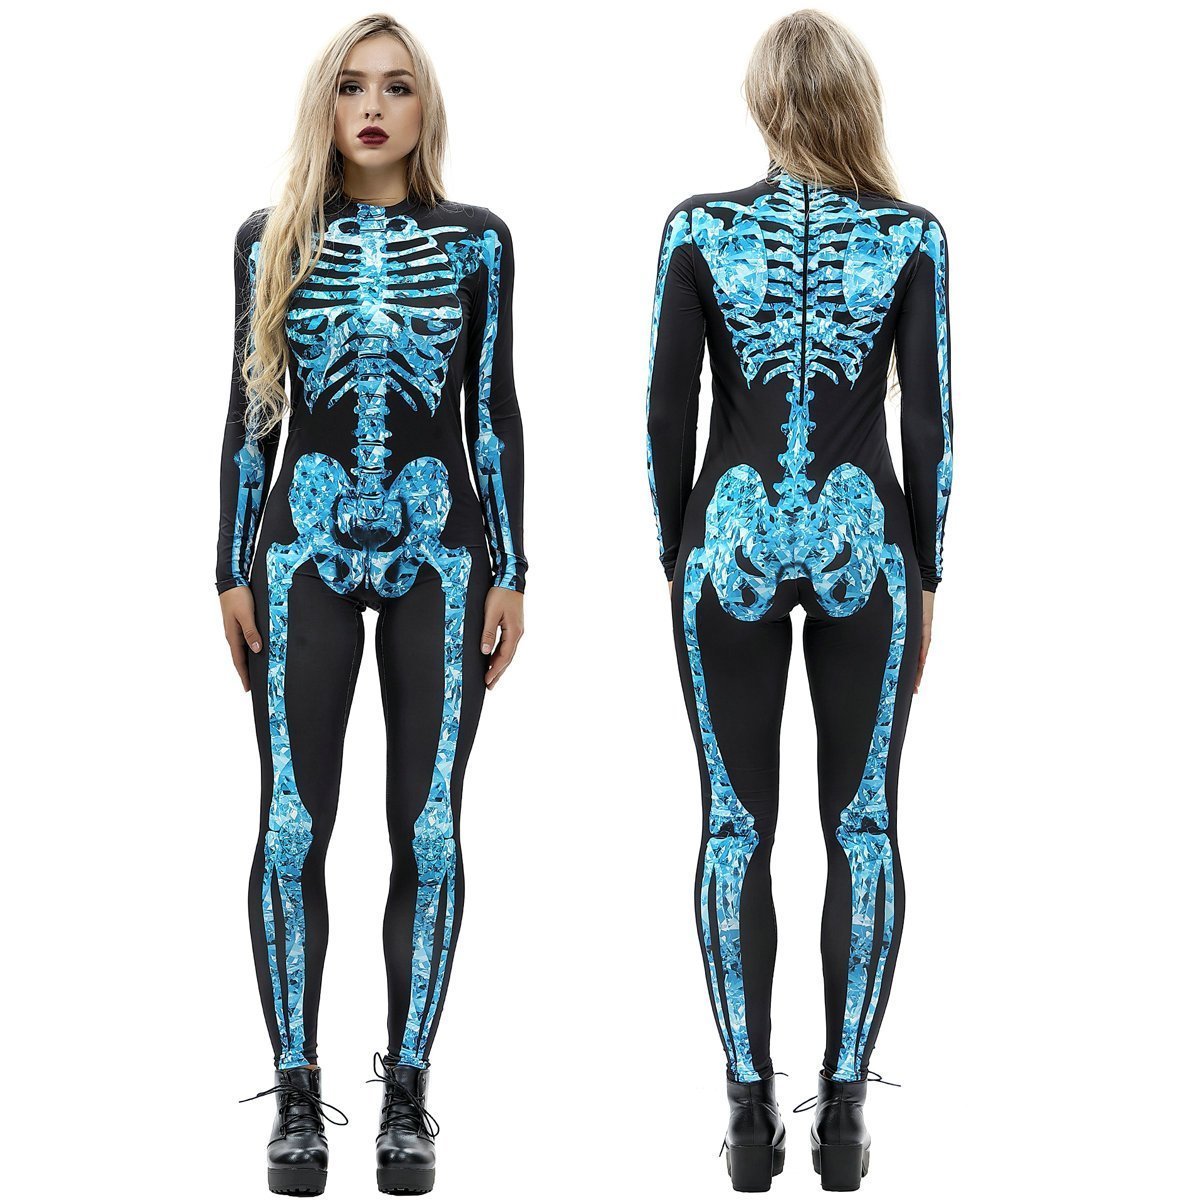 Halloween Skull Outfits Skeleton Cosplay Costume Jumpsuit for Women-Pajamasbuy